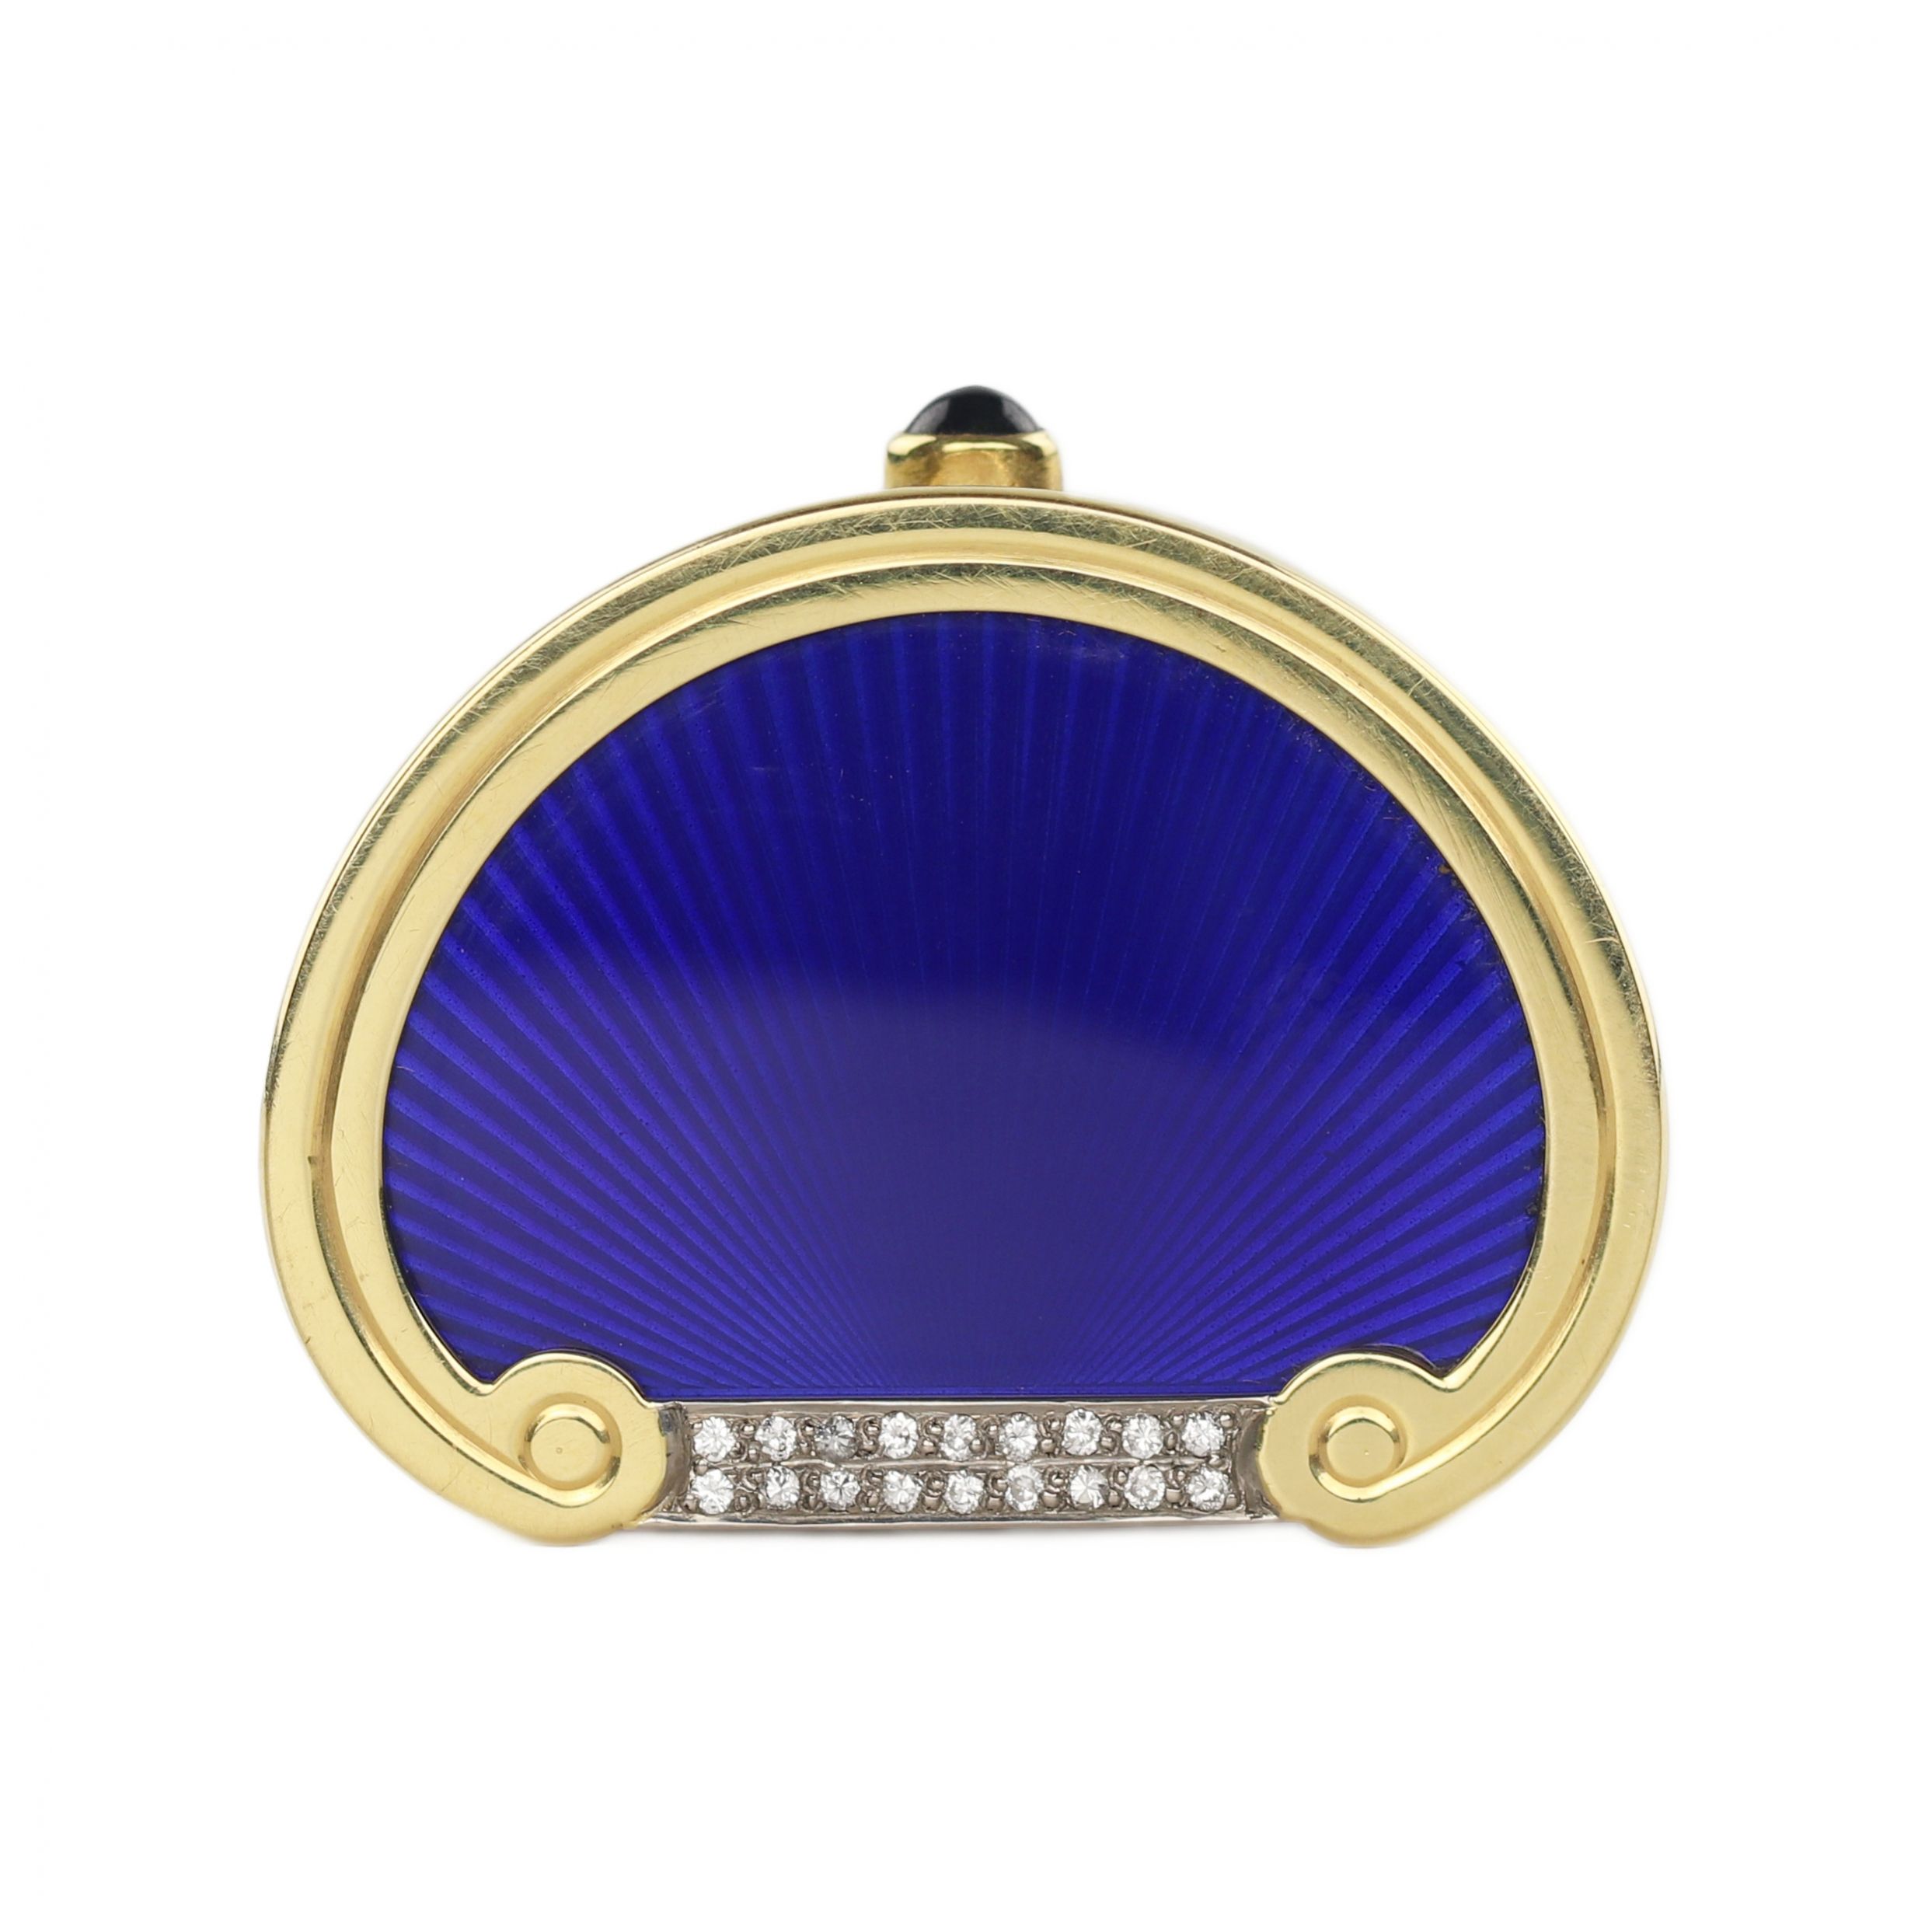 19th century English gold pill box with diamonds and guilloche enamel. - Image 6 of 8